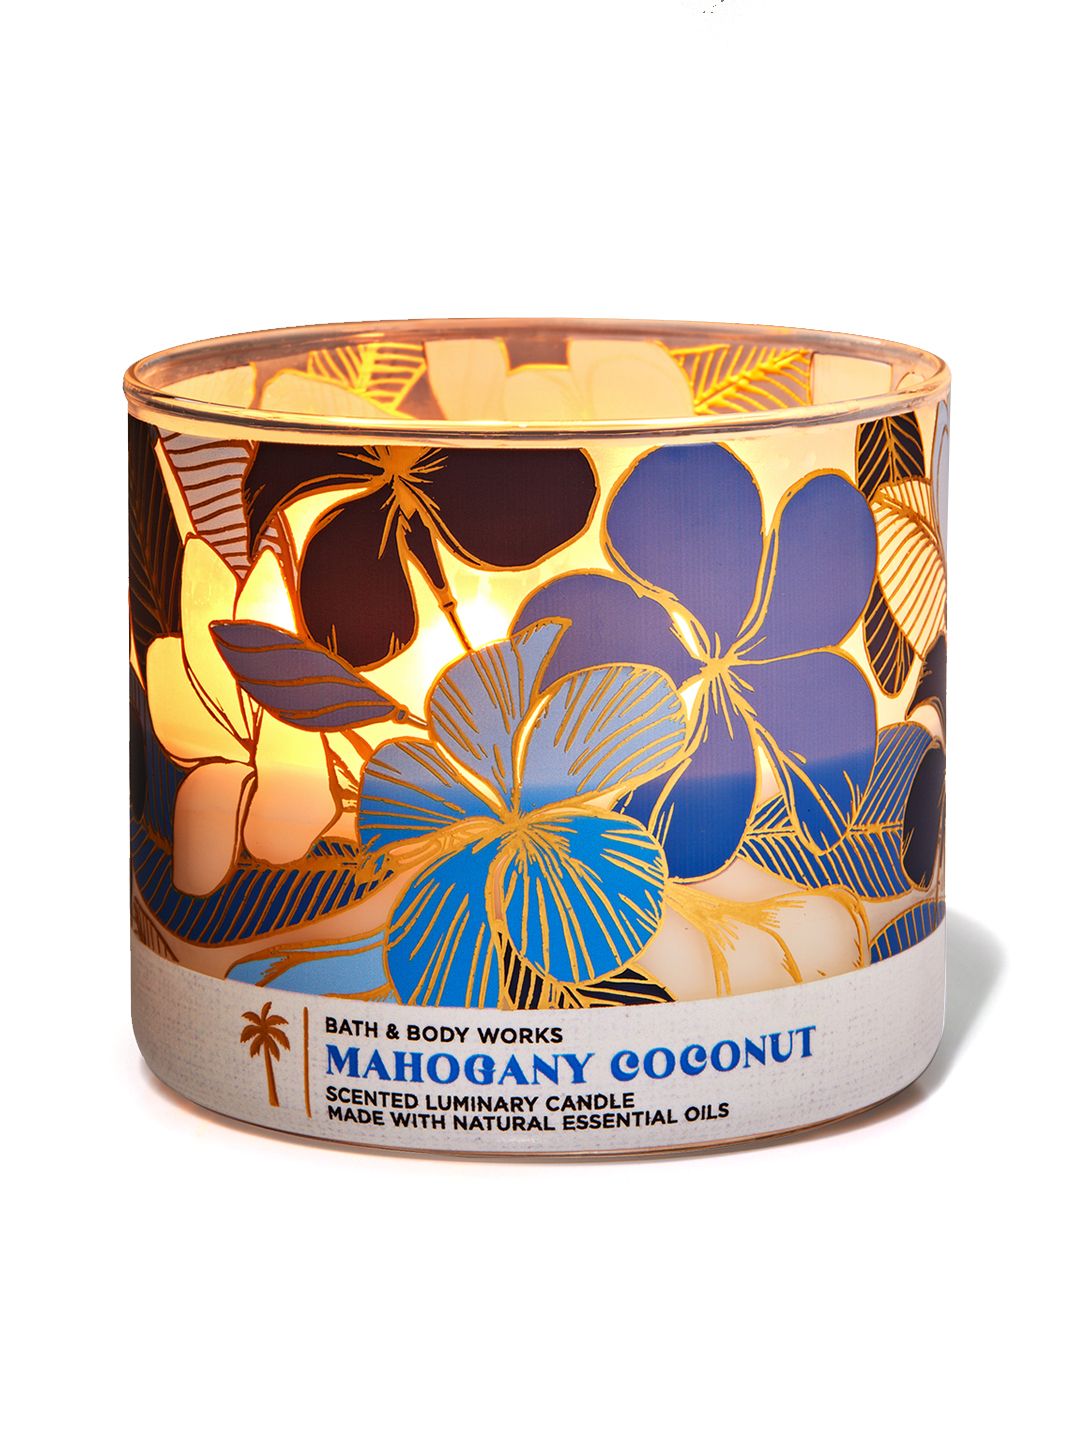 Bath & Body Works Mahogany Coconut 3-Wick Scented Luminary Candle - 411 g Price in India